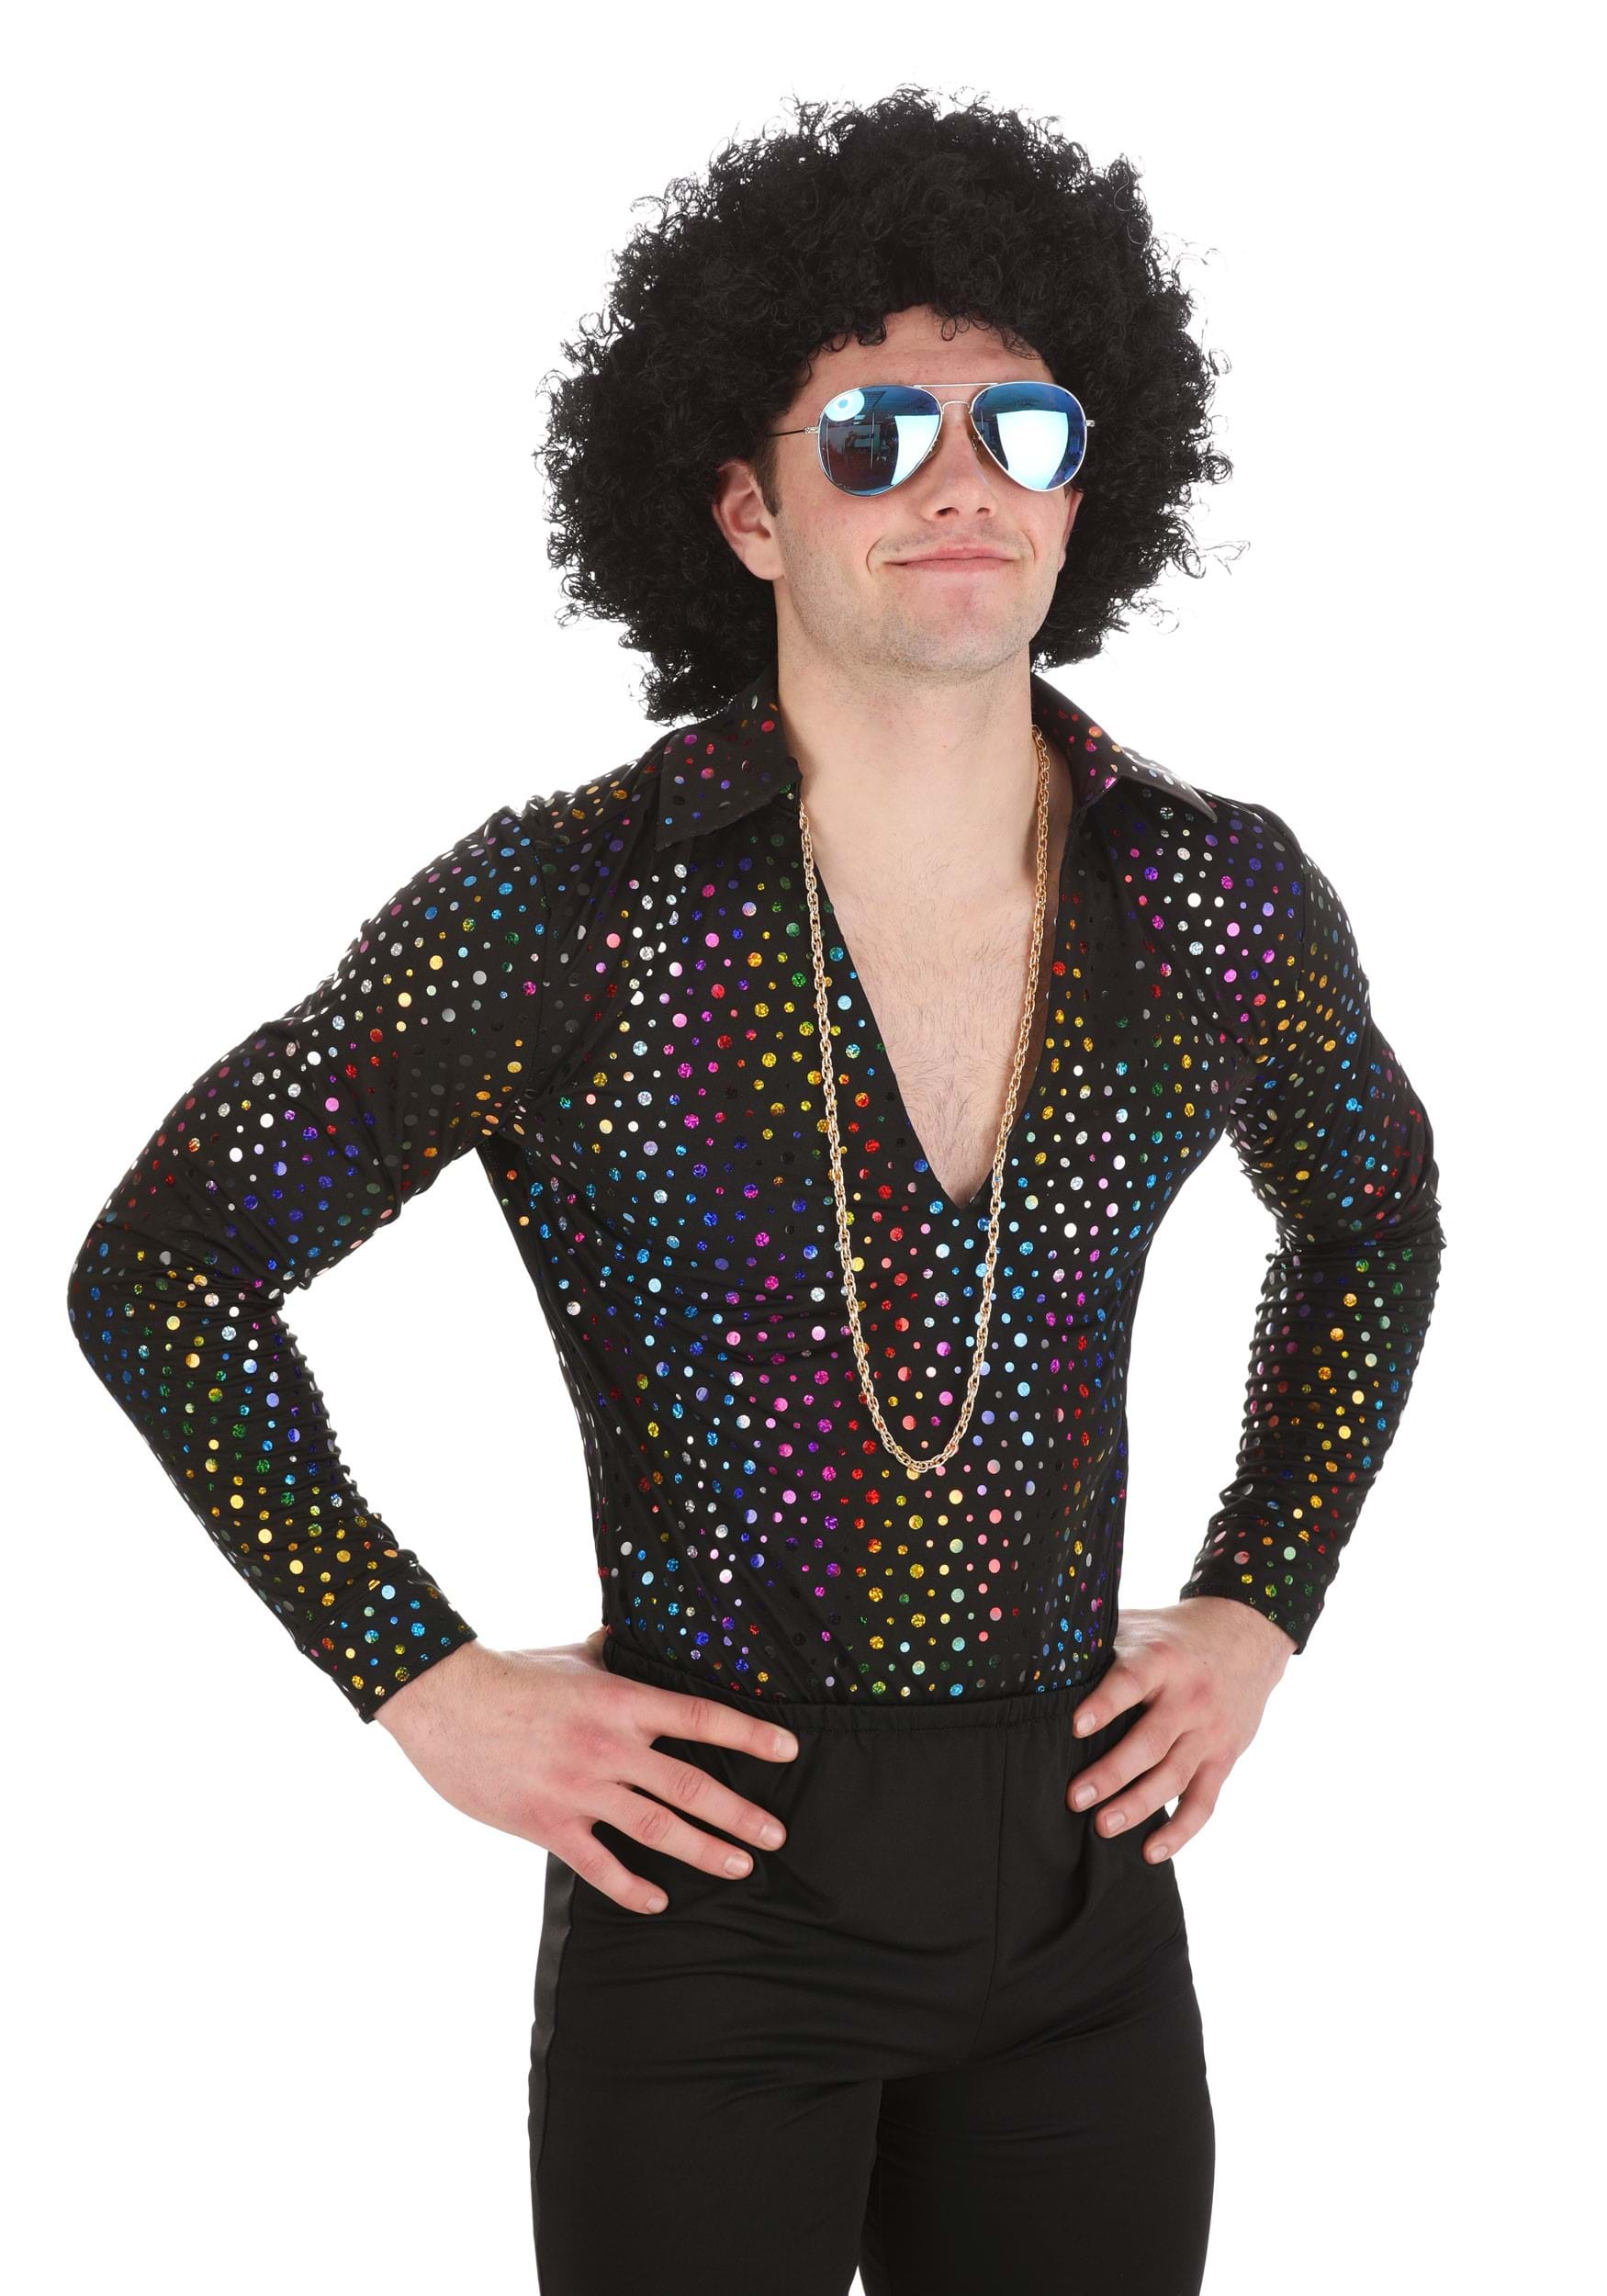 Mens Disco Costume - Wedding Singer Shirt with Black Flares - Hire